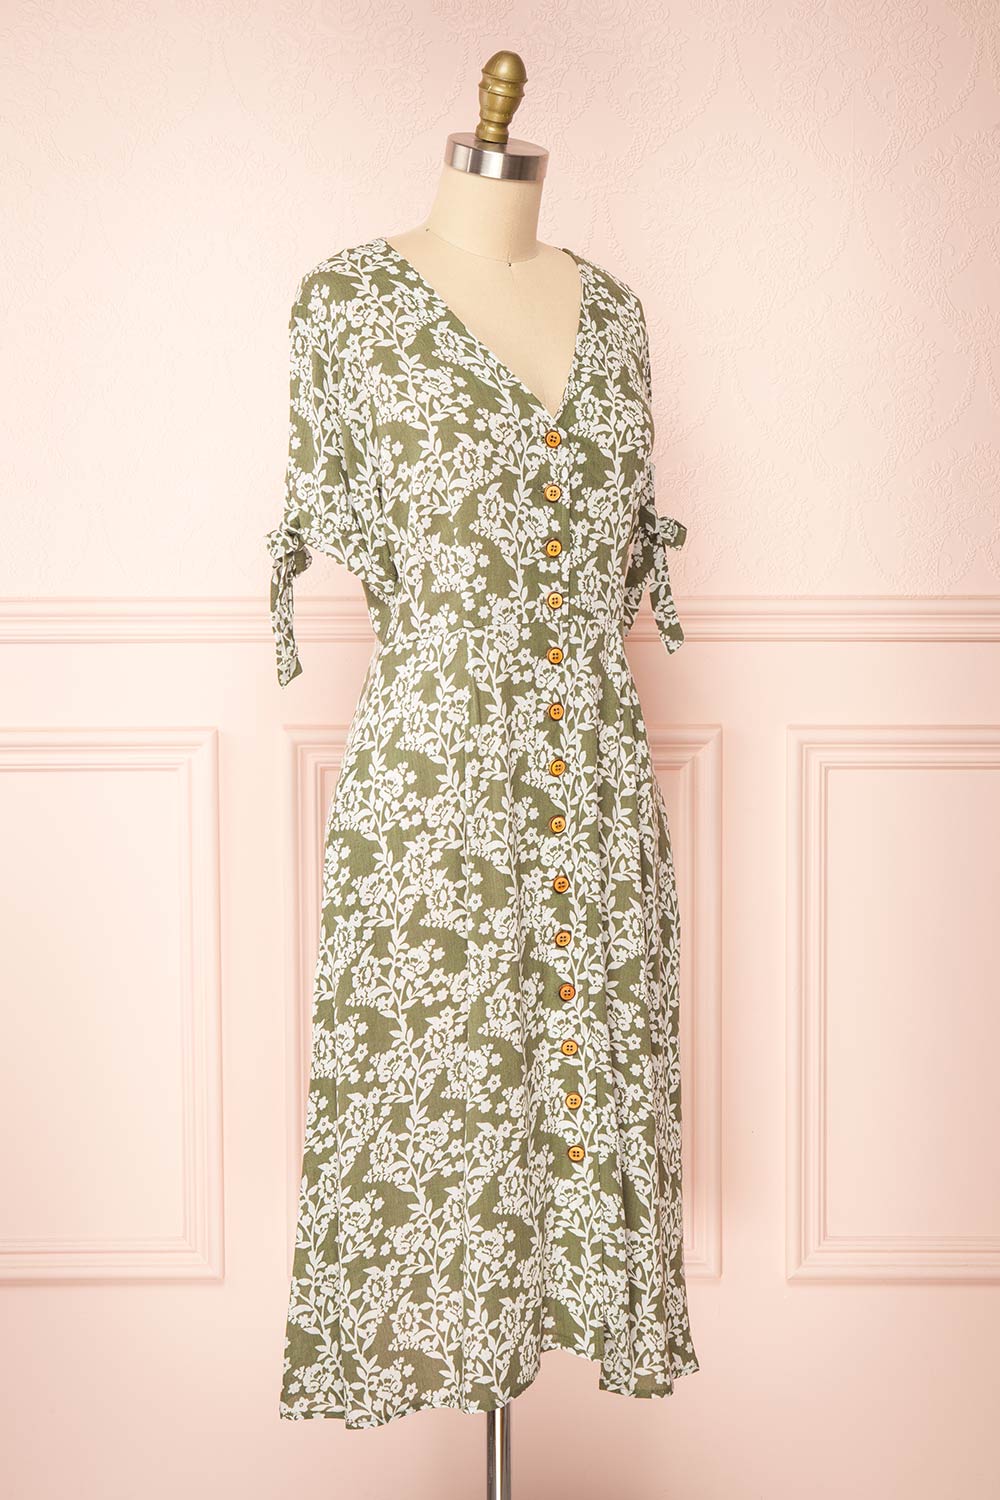 Yavanna Green Short Sleeve Buttoned Floral Midi Dress | Boutique 1861 side view 